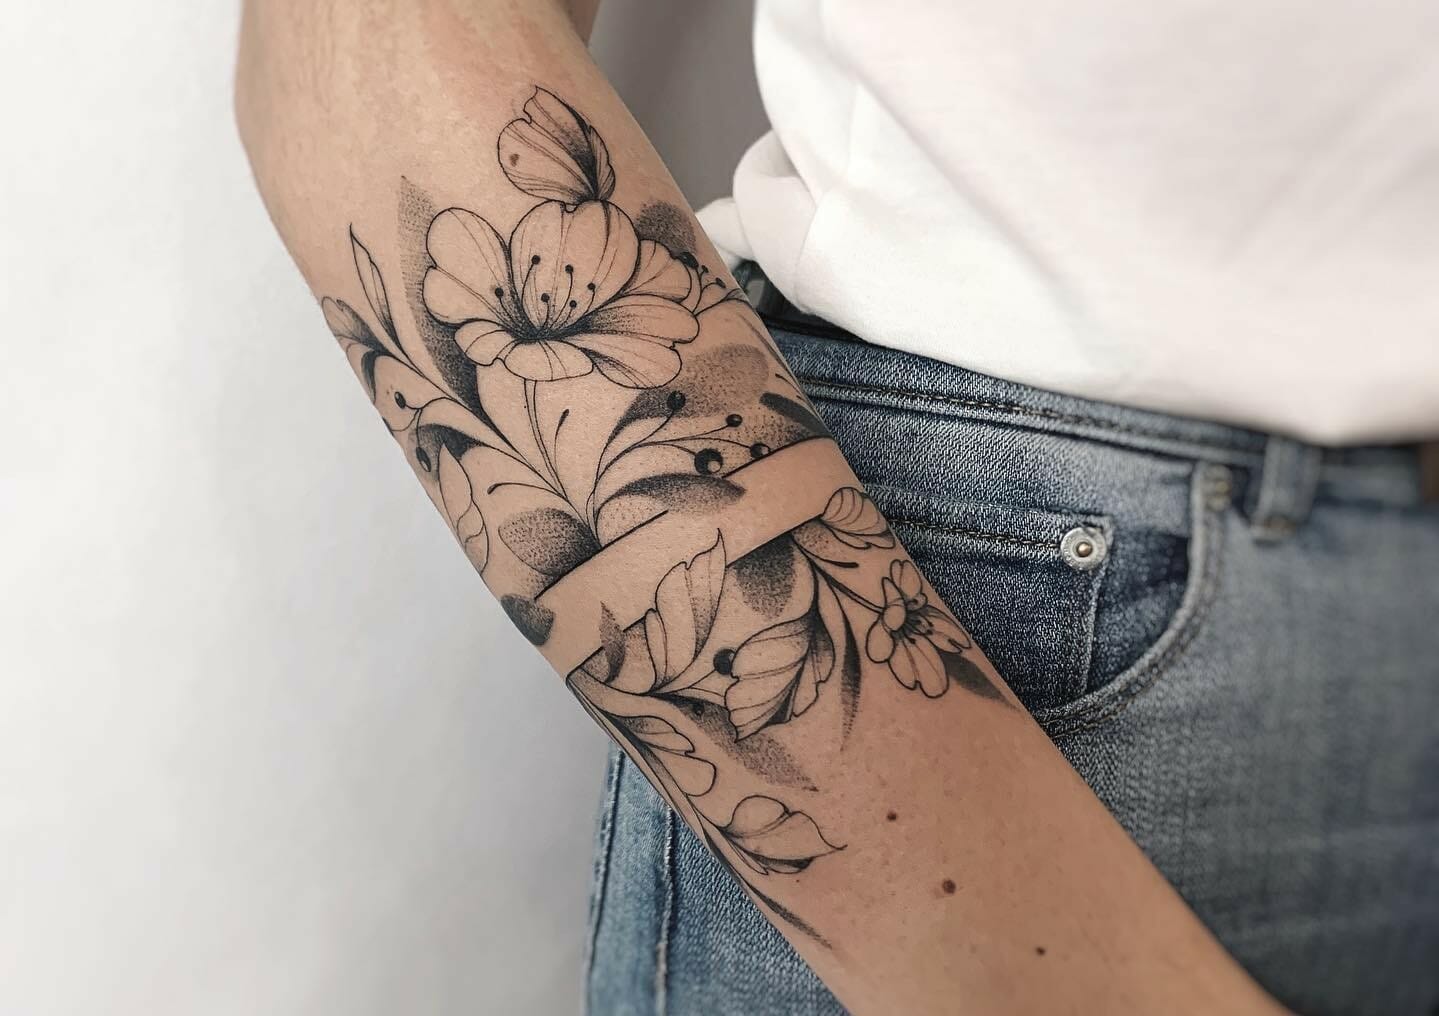 Dotwork floral arm band - Tattoo Abyss Montreal